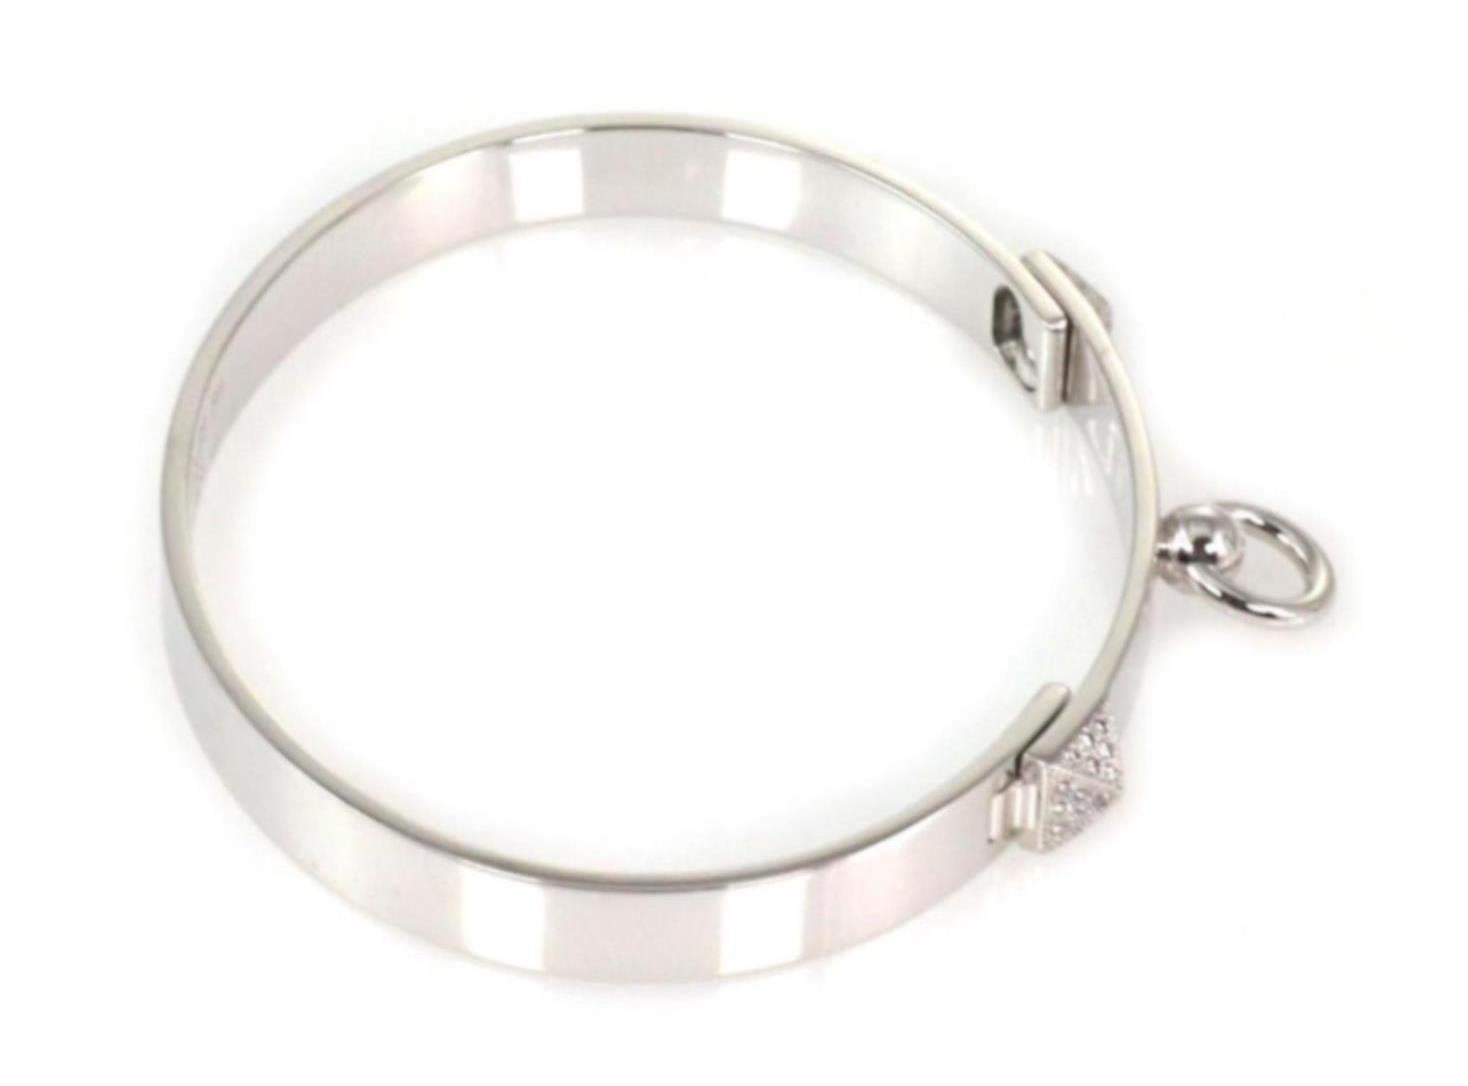 This stunning Collier de Chein collection is by Hermes, it features an authentic bangle crafted from 18k white gold with a high polished finish featuring a 6mm wide band. The front of the bangle has two small pyramid like design set with diamond and